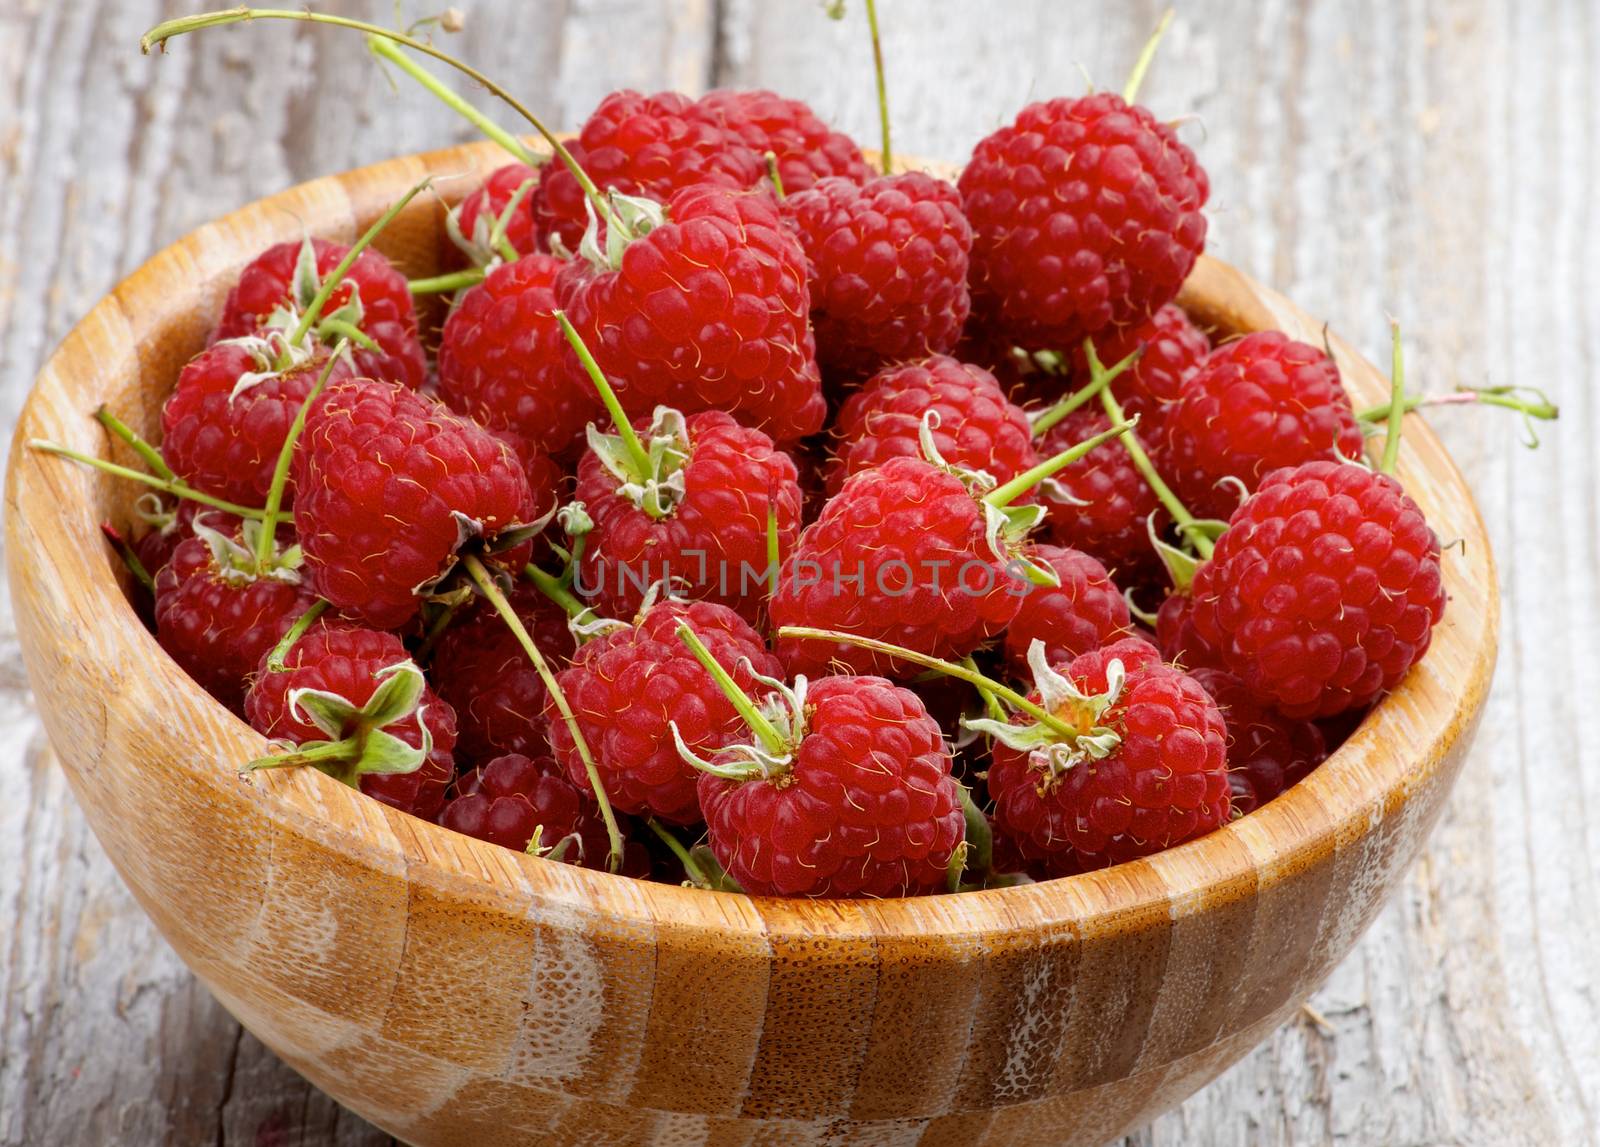 Perfect Ripe Raspberries with Stems in Wooden Bowl closeup on Rustic Wooden background